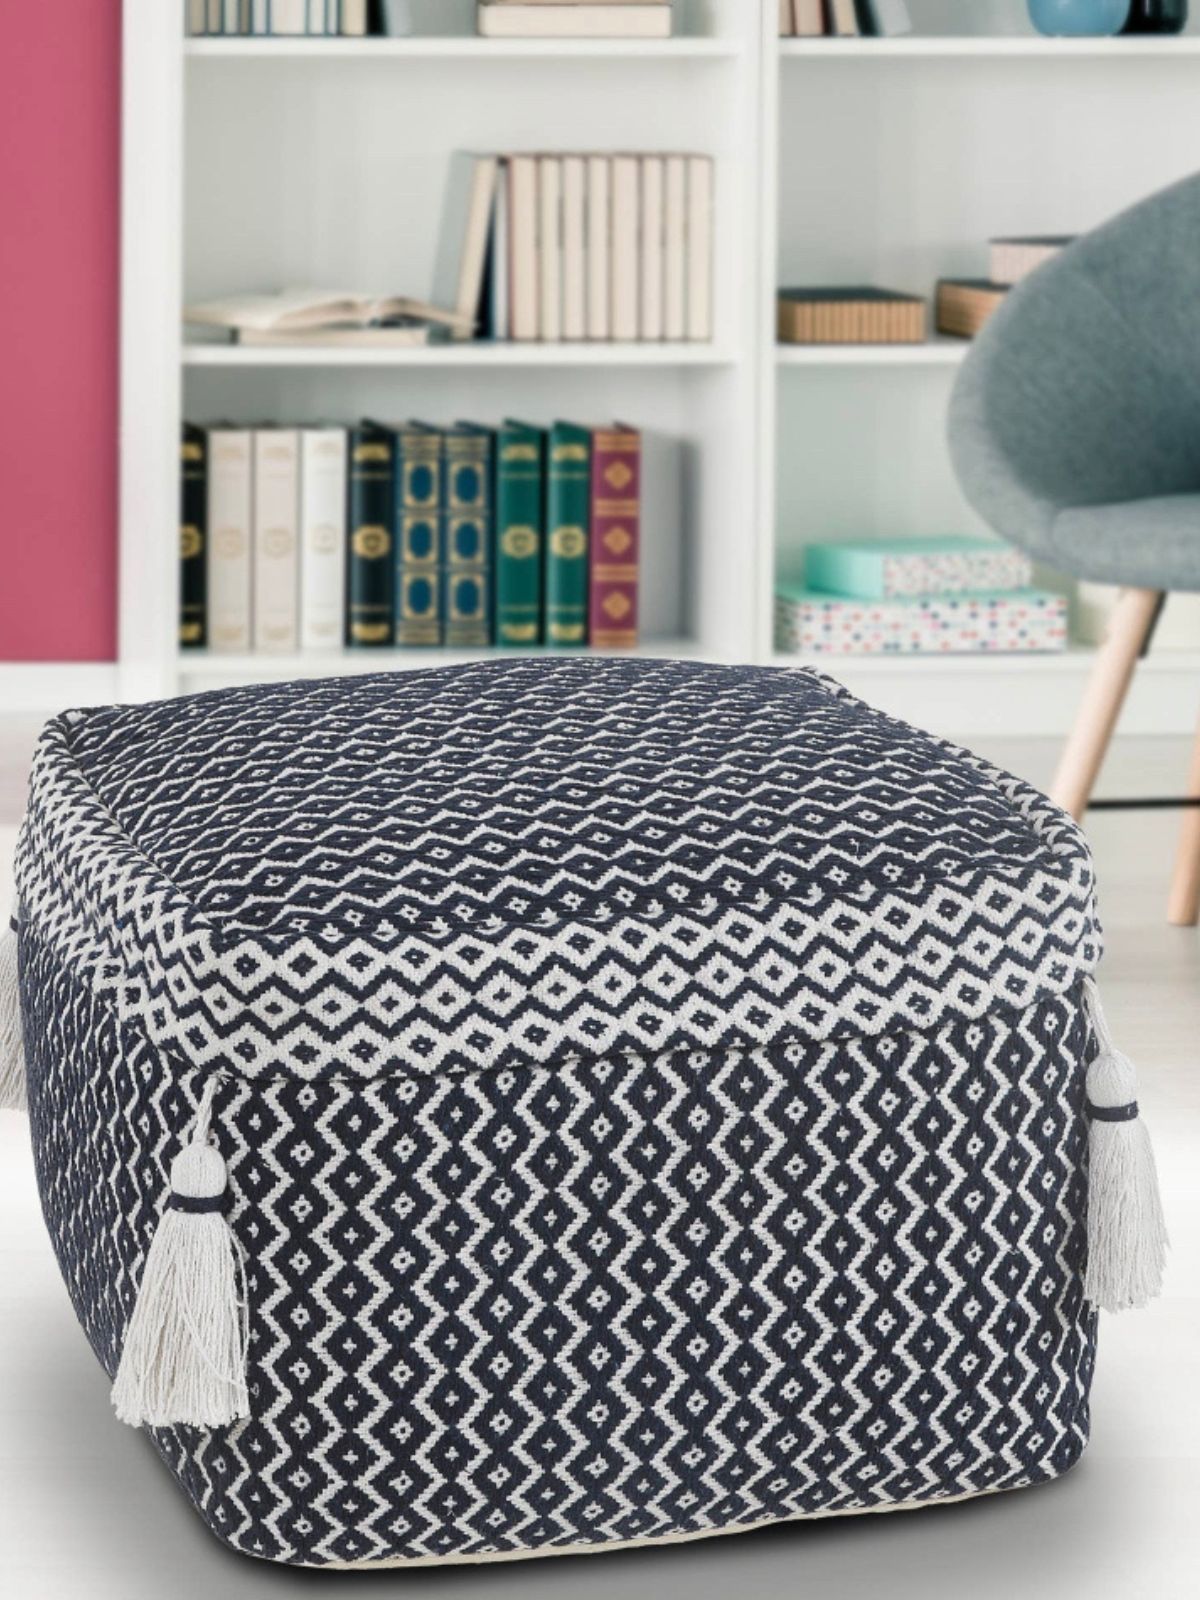 This classic coloring and geometric design is sure to thrill! Bring the versatility of our pouf collection home with you today.